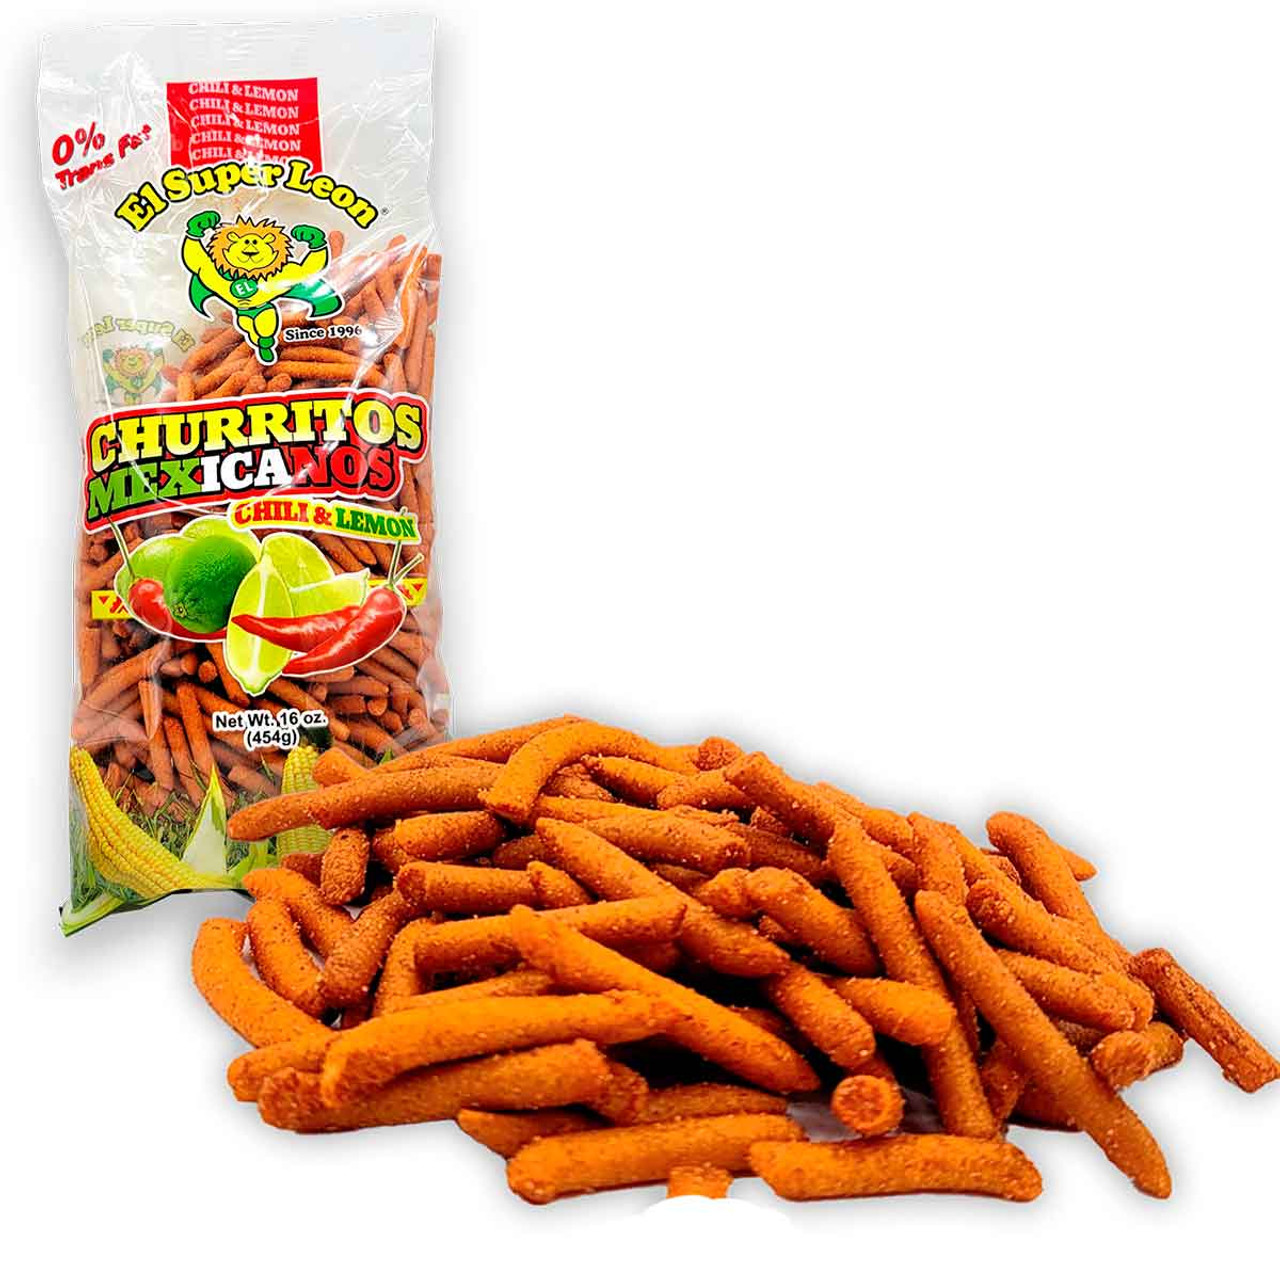 Package with sixteen ounces of delicious churriots snacks flavored with lemon and spicy chili as well made into a crunchy texture.